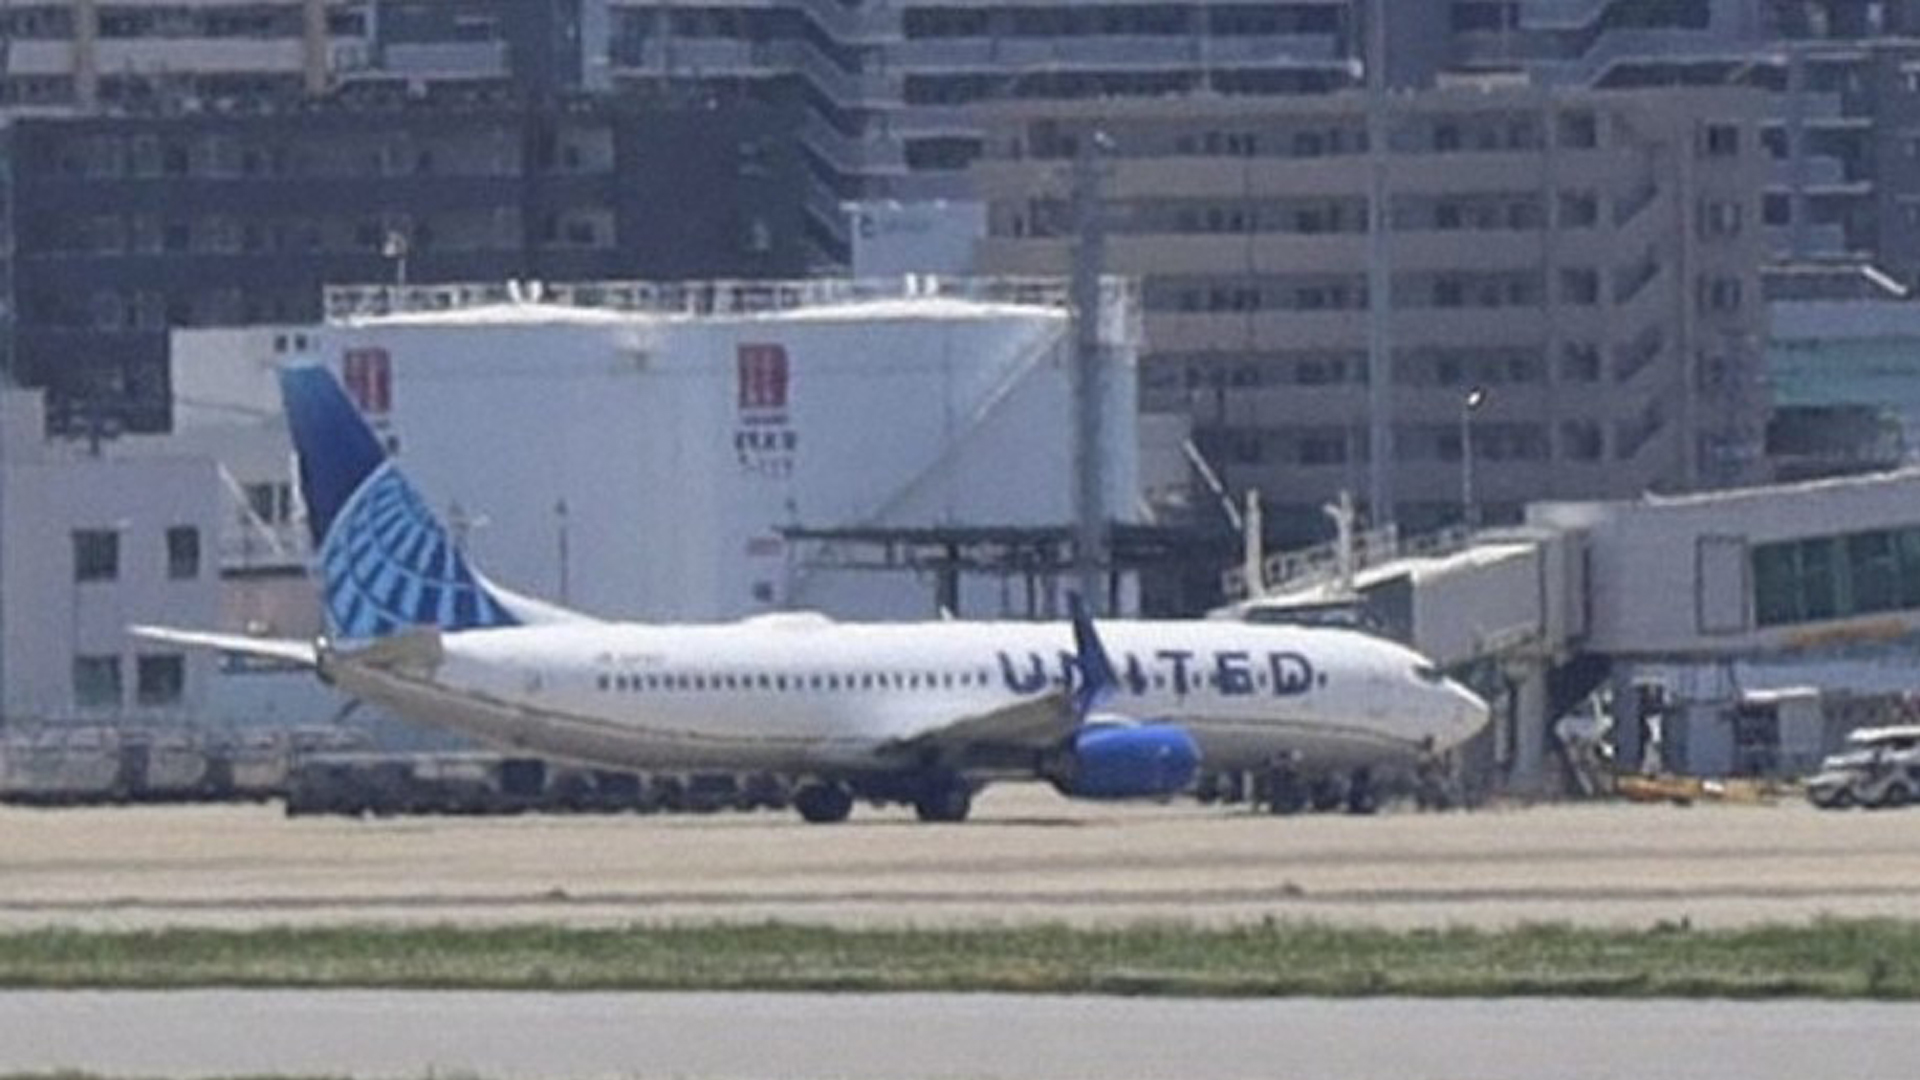 Boeing 737 plane makes emergency landing minutes after take-off with 50 passengers on board in latest safety blunder